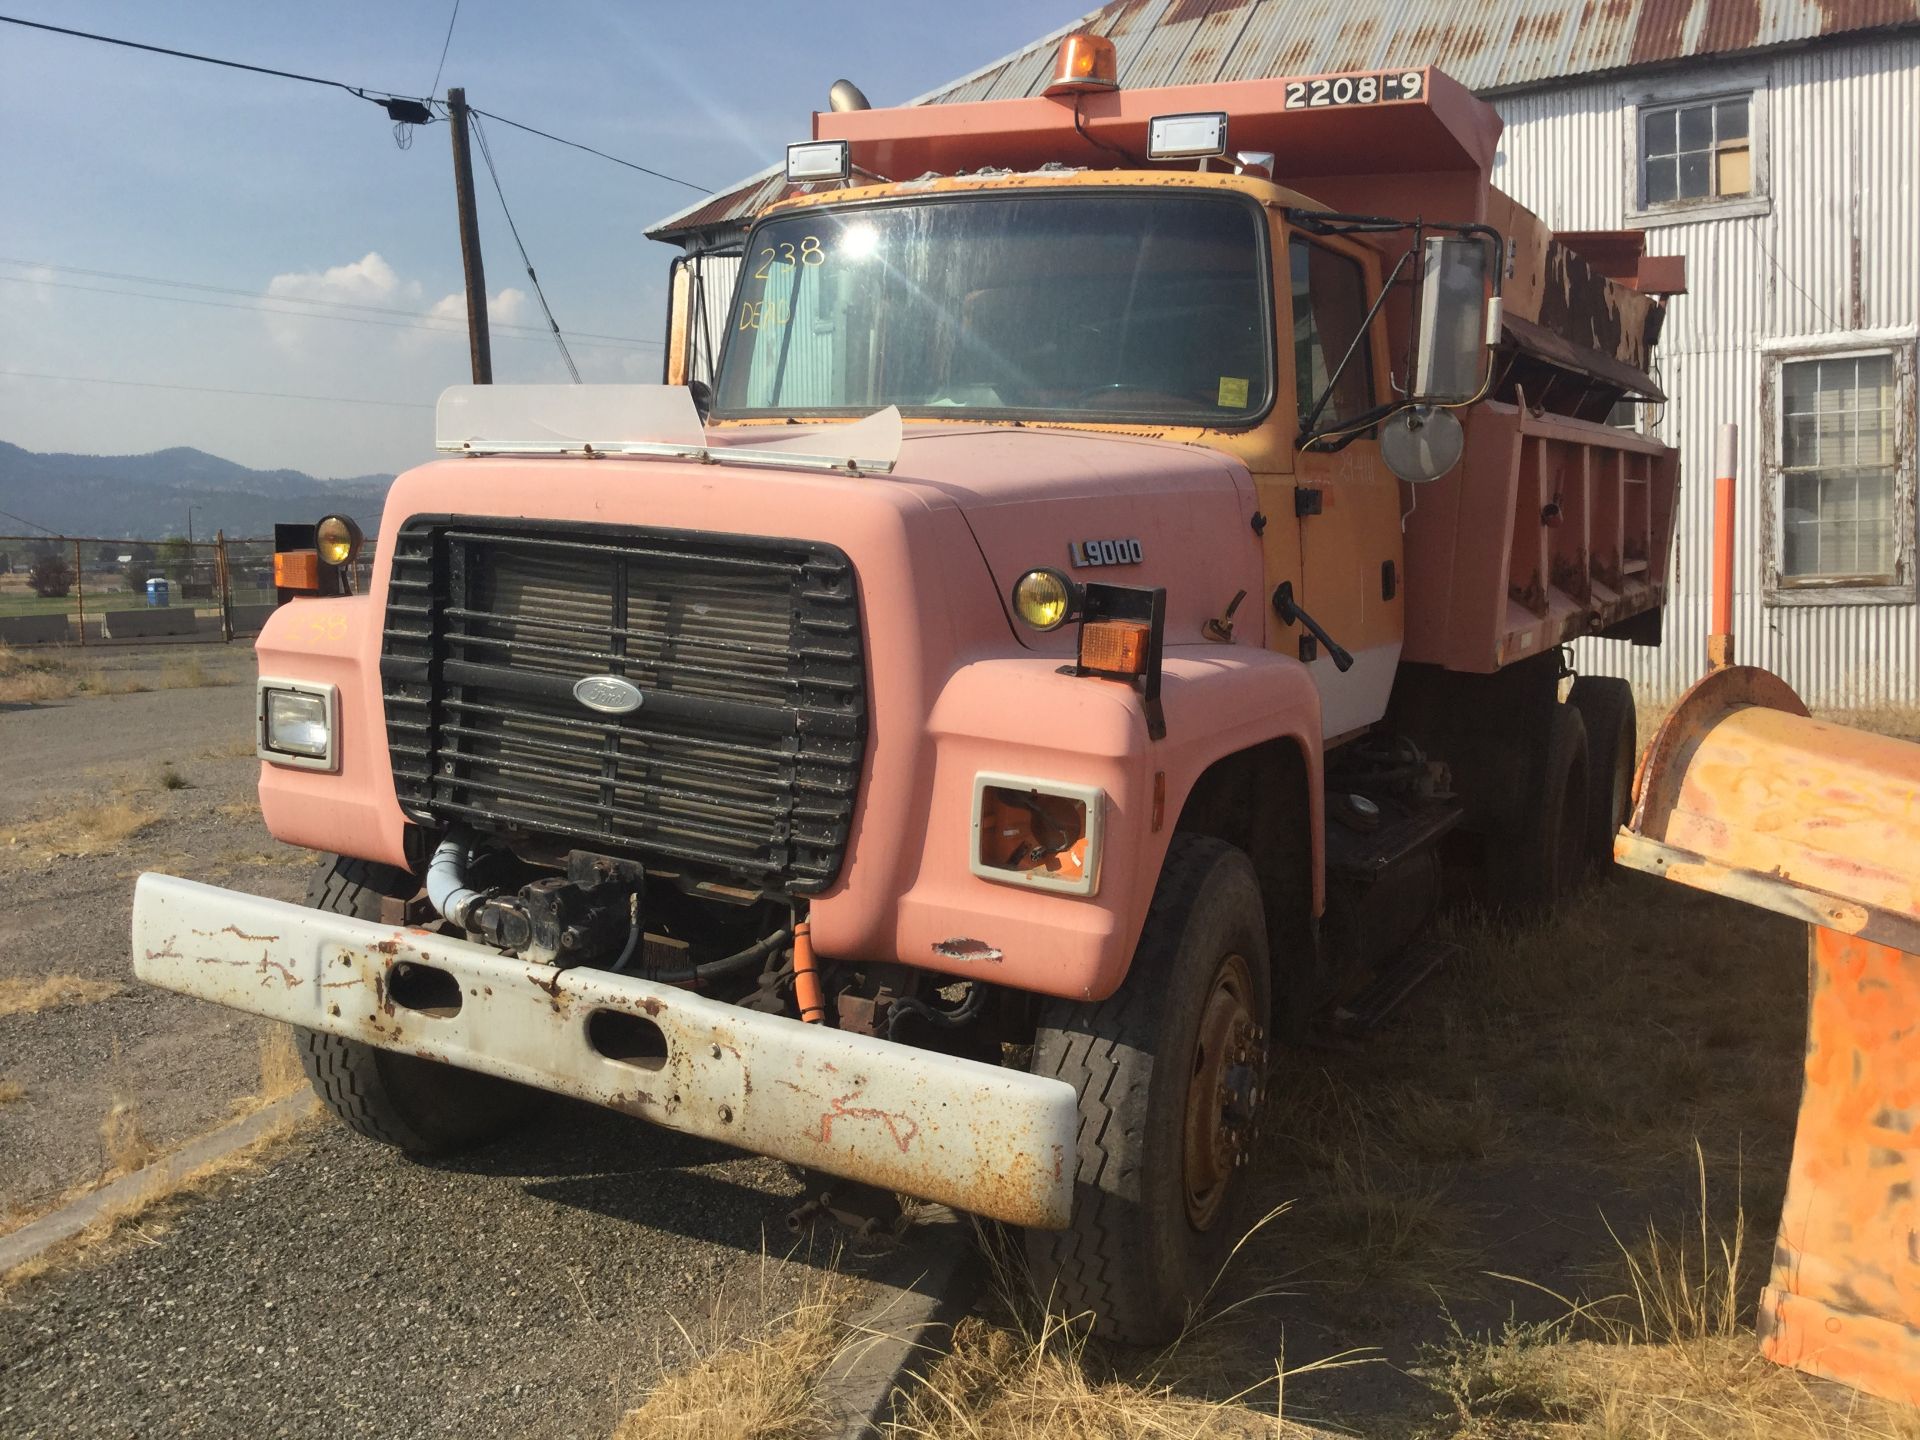 Year: 1992 Make: Ford Model: L9000 Type: Dump Truck Vin#: A33754 Mileage/Hours: 345000 10L